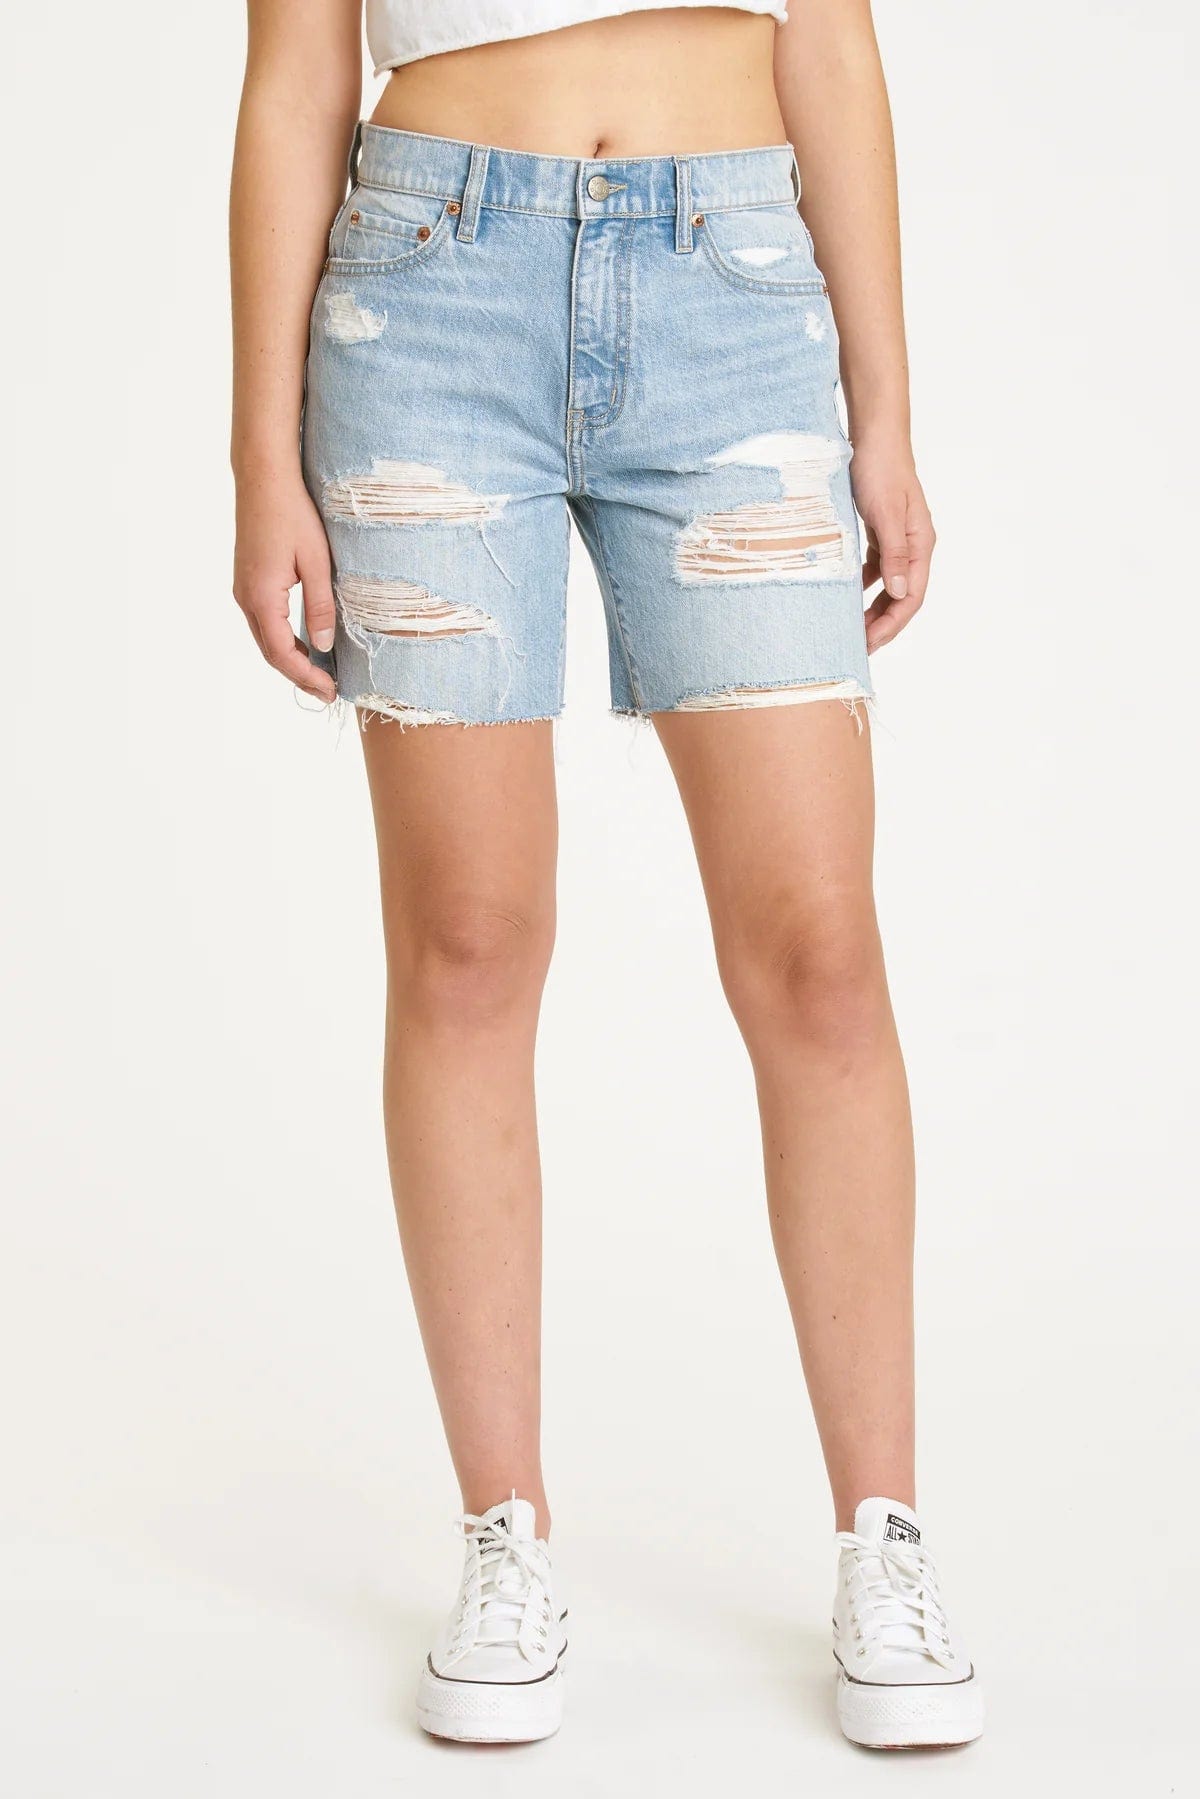 DAZE 1999 Slouch 90's Fit Denim Shorts in Intuition - Shorts - Blooming Daily